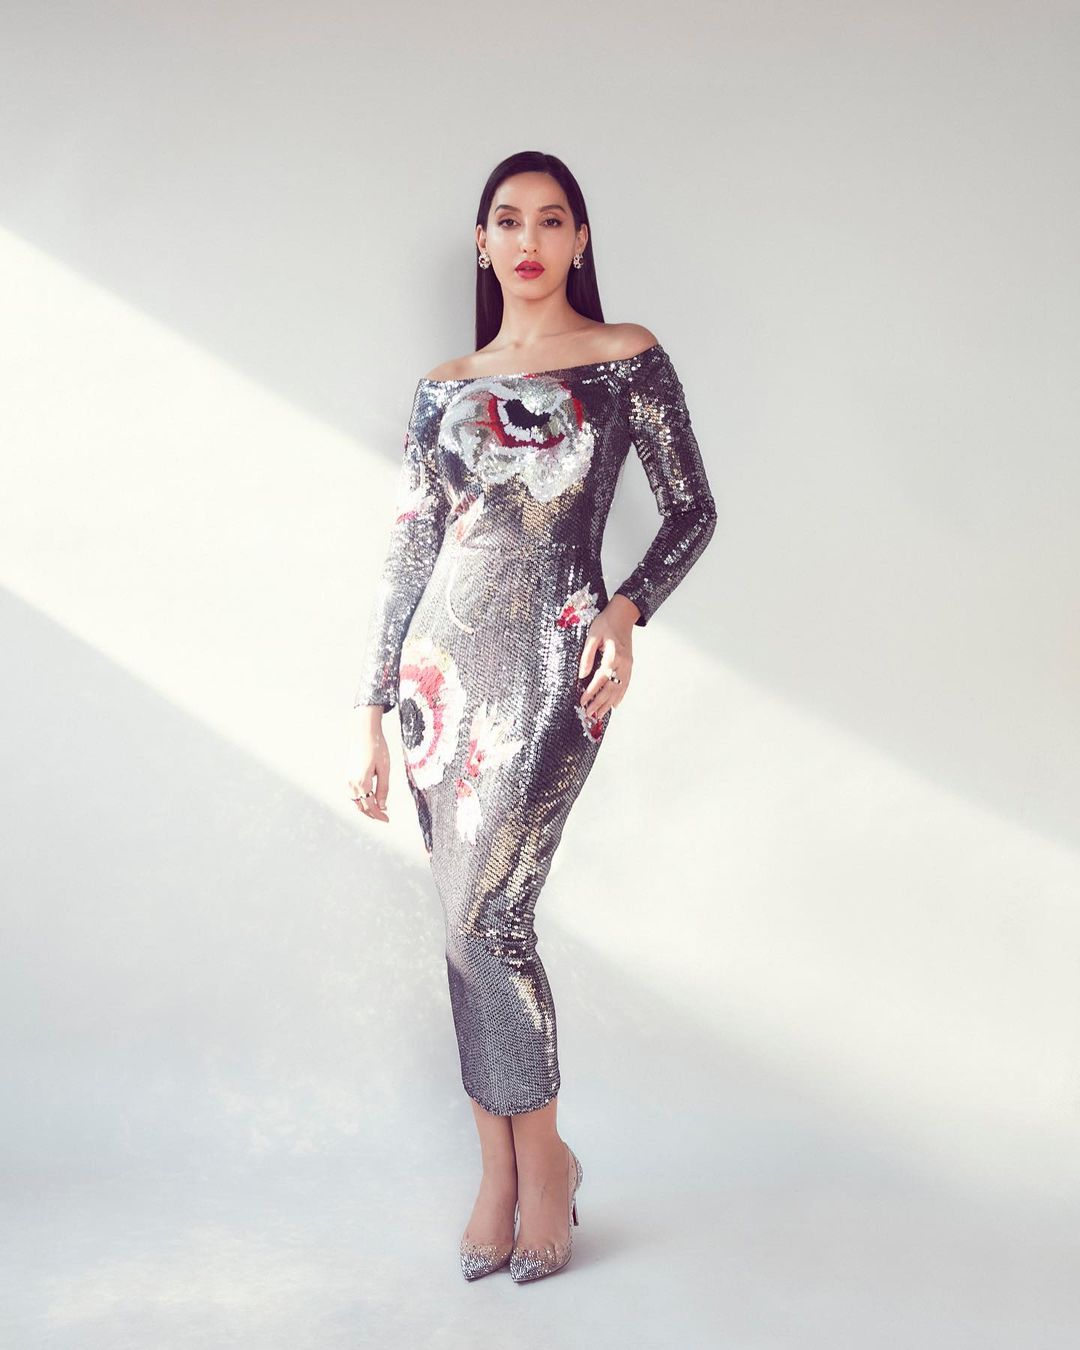 Nora Fatehi flaunts her curves in the silver shimmery dress.